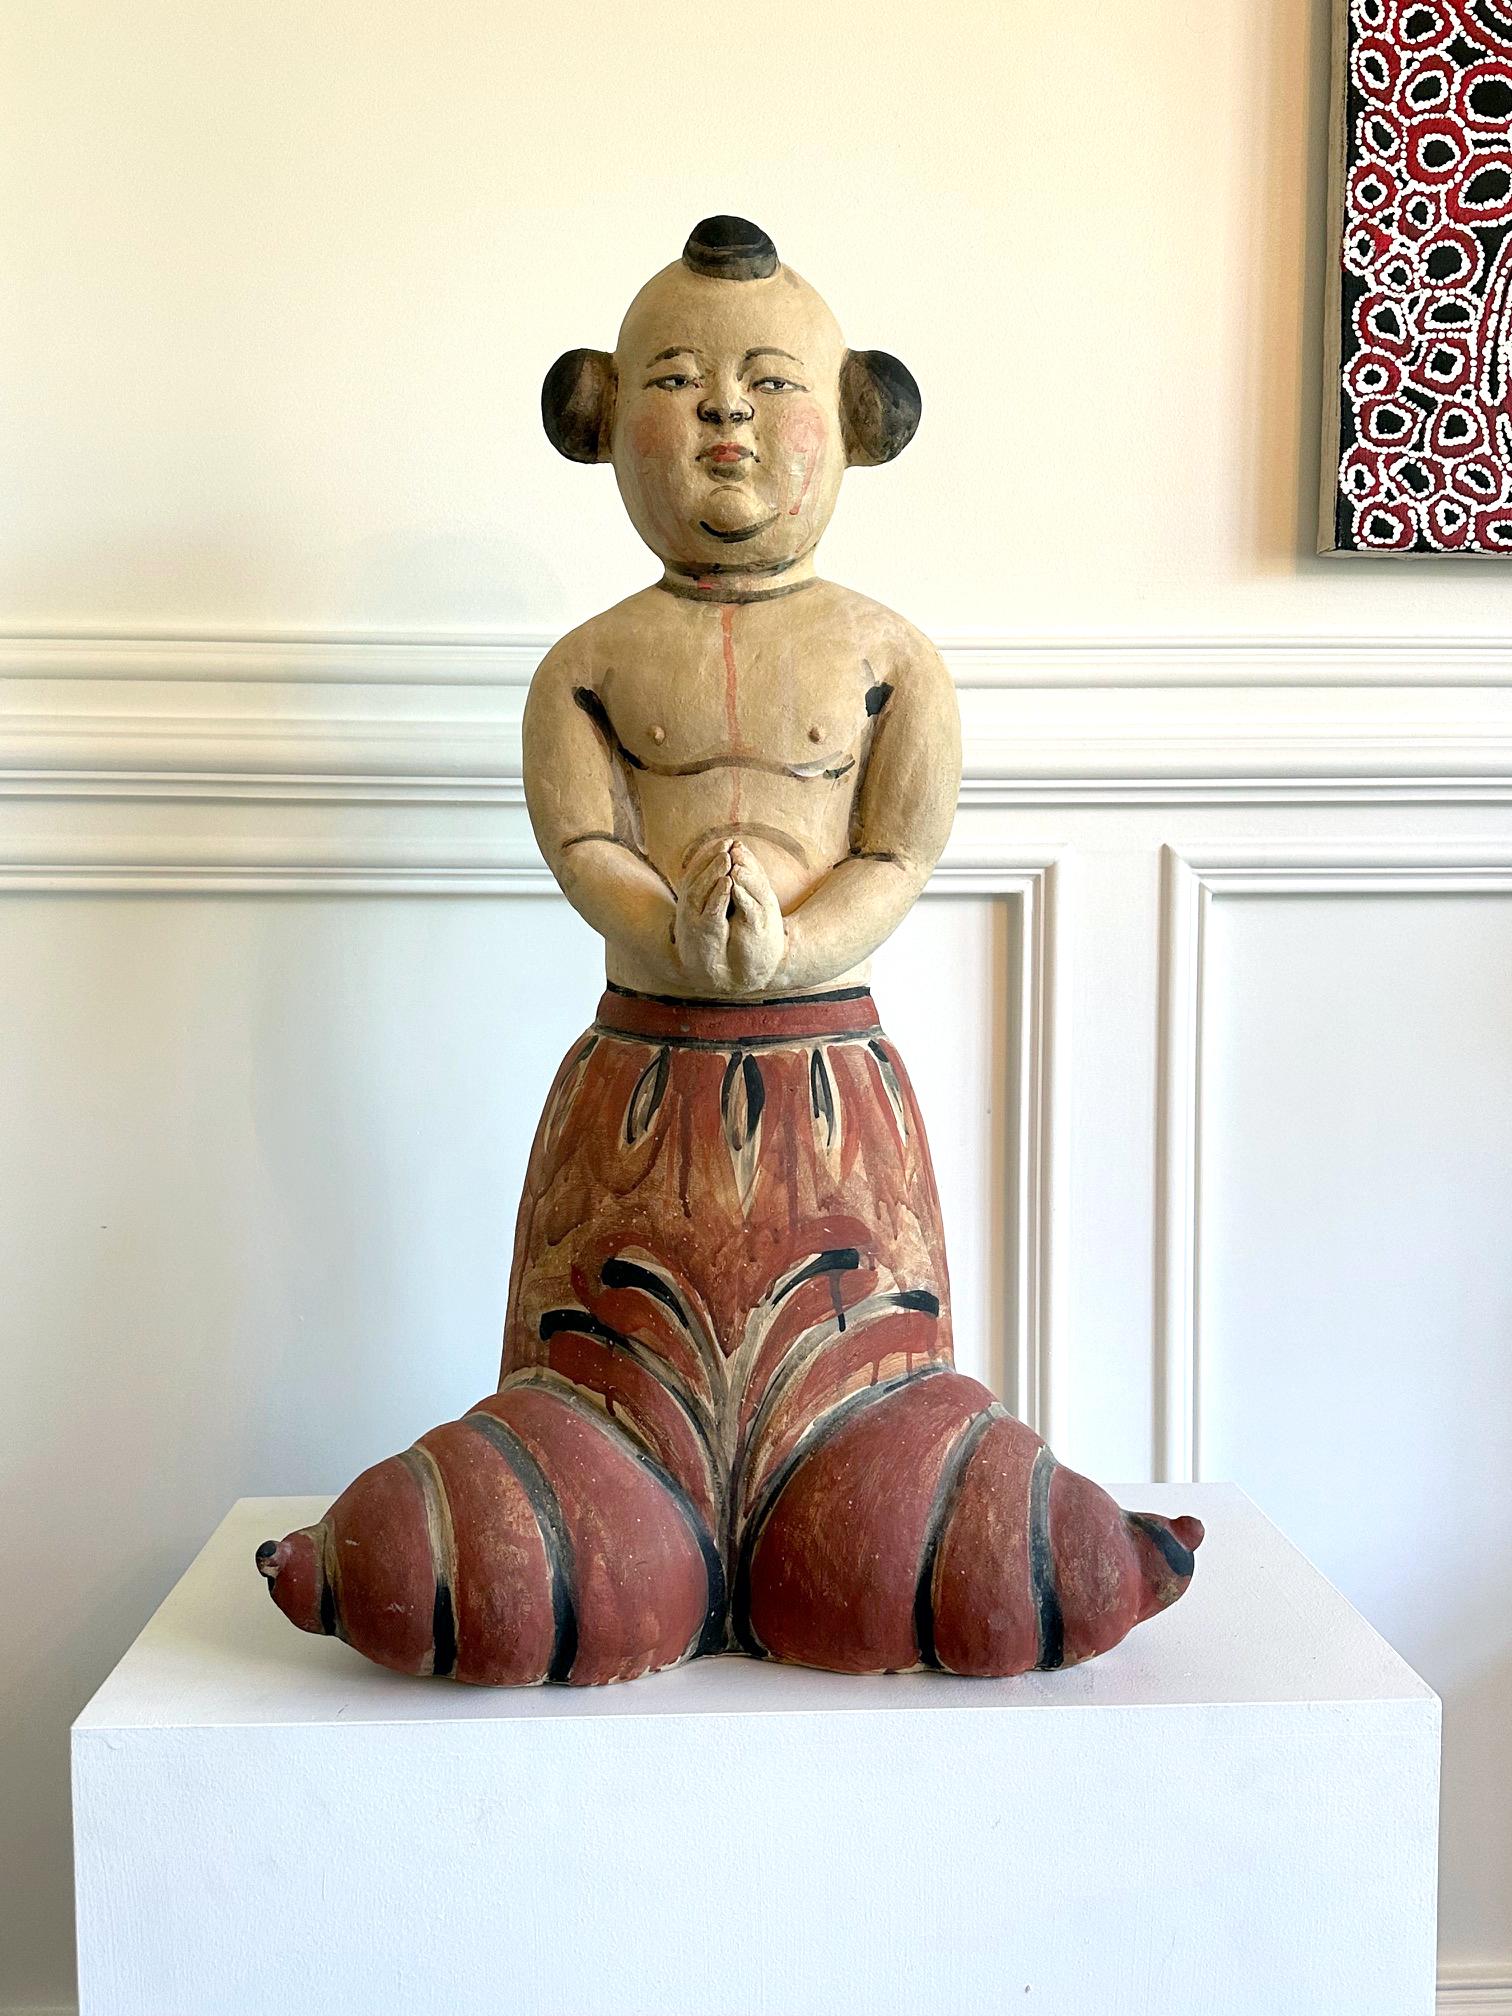 A large figurative ceramic sculpture entitled by Akio Takamori (1950 - 2017) created in 2004. Stoneware with hand-painted surface, the sculpture depicts a half-naked standing boy figure with his hands in praying position.   His berobed lower body,